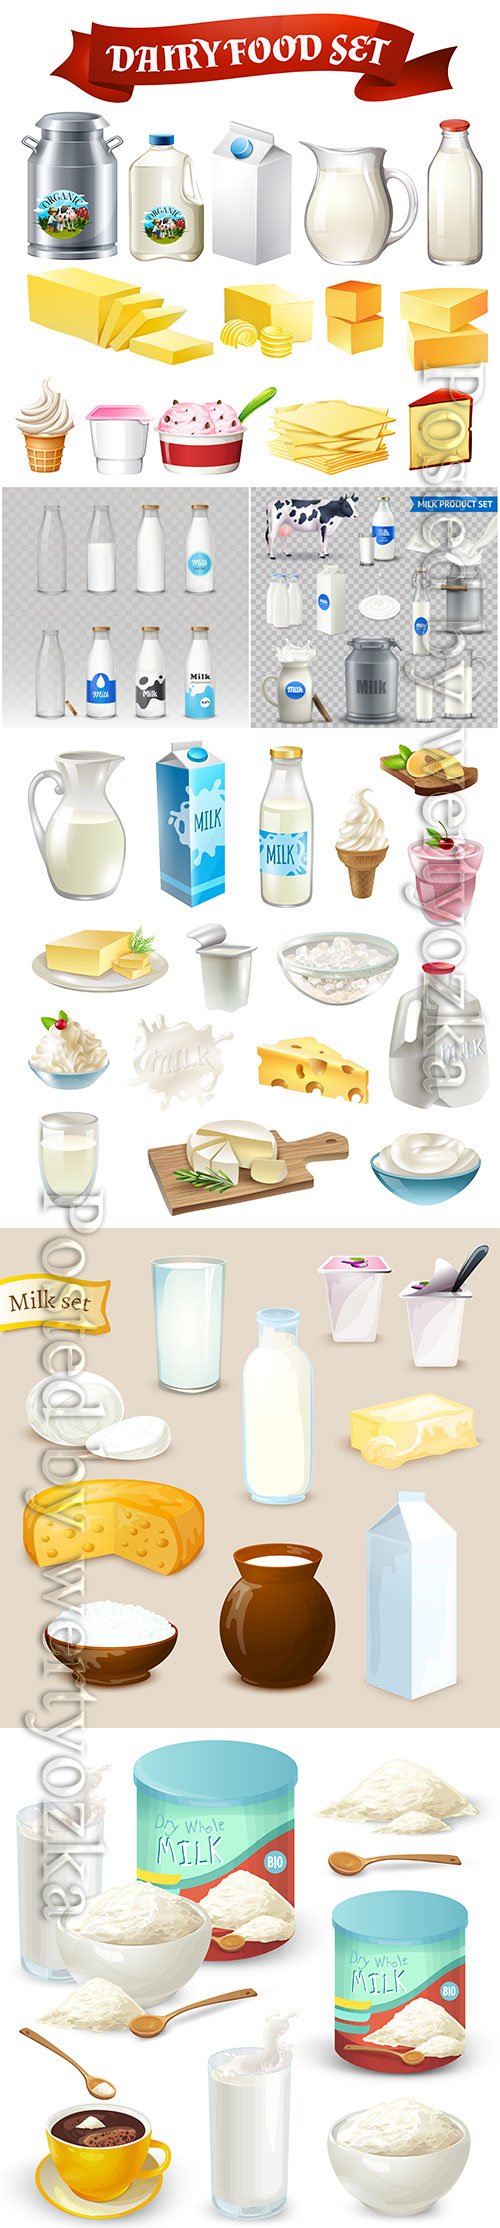 Dairy products vector set